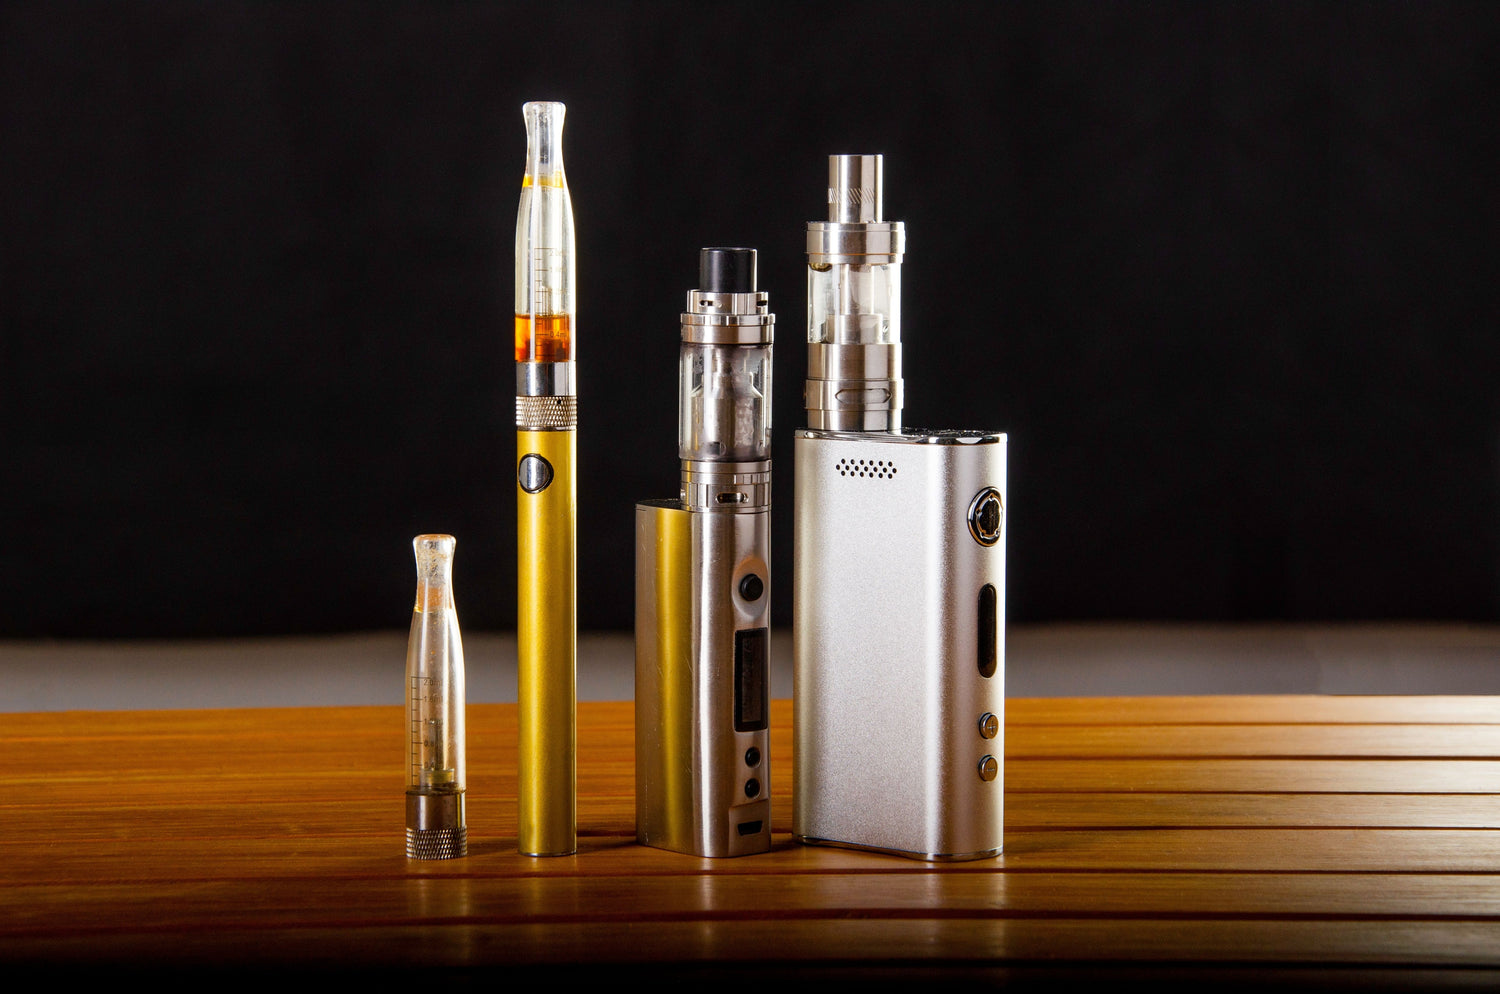 New e-cigarette restrictions will likely apply to CBD vapes